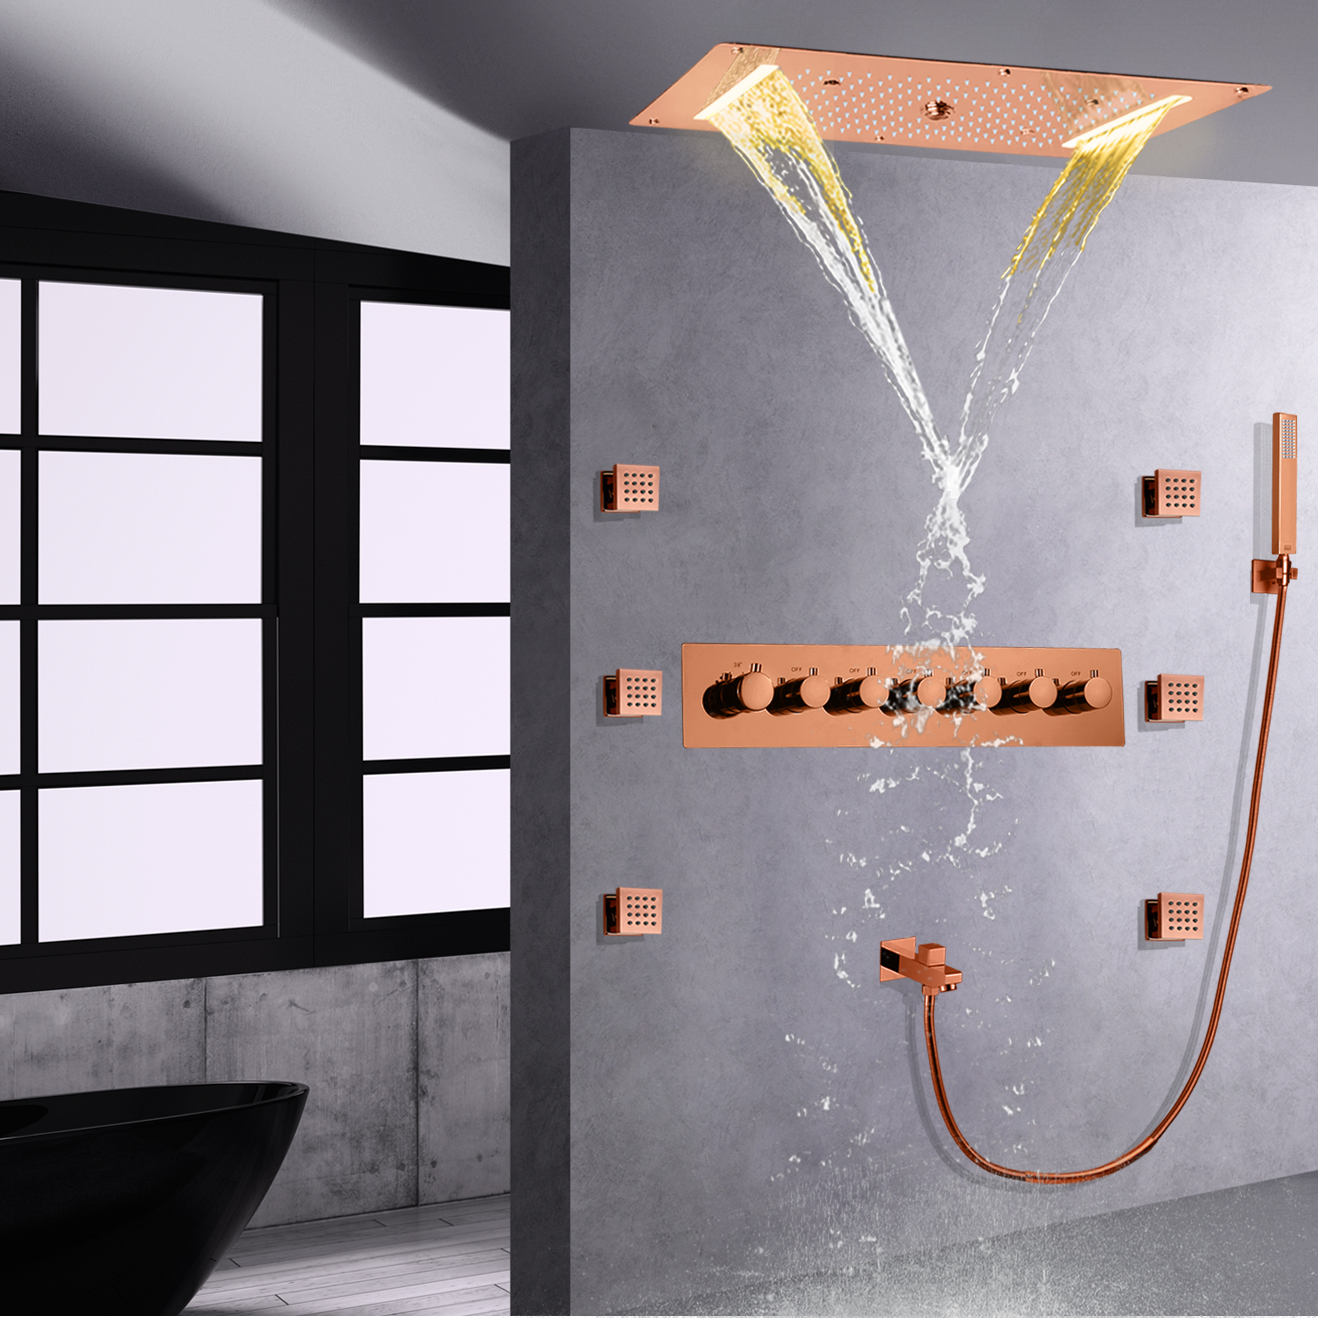 Rose Gold LED Shower Faucets Bathroom Temperature Hydro Jet Rainfall Waterfall Bubble Spa With Handheld